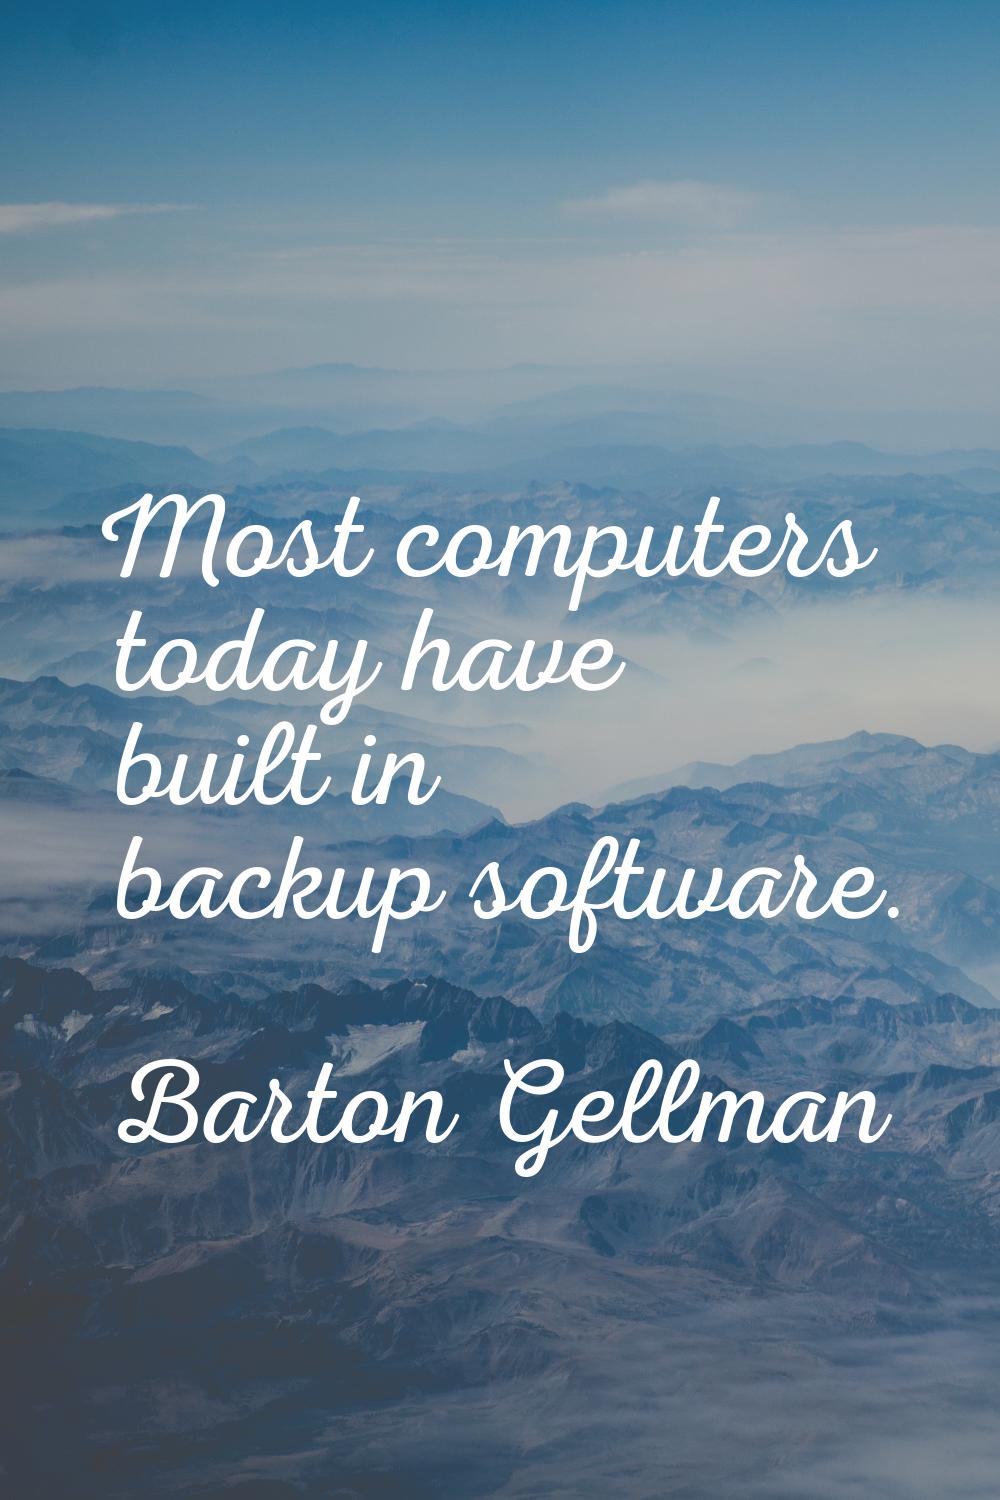 Most computers today have built in backup software.